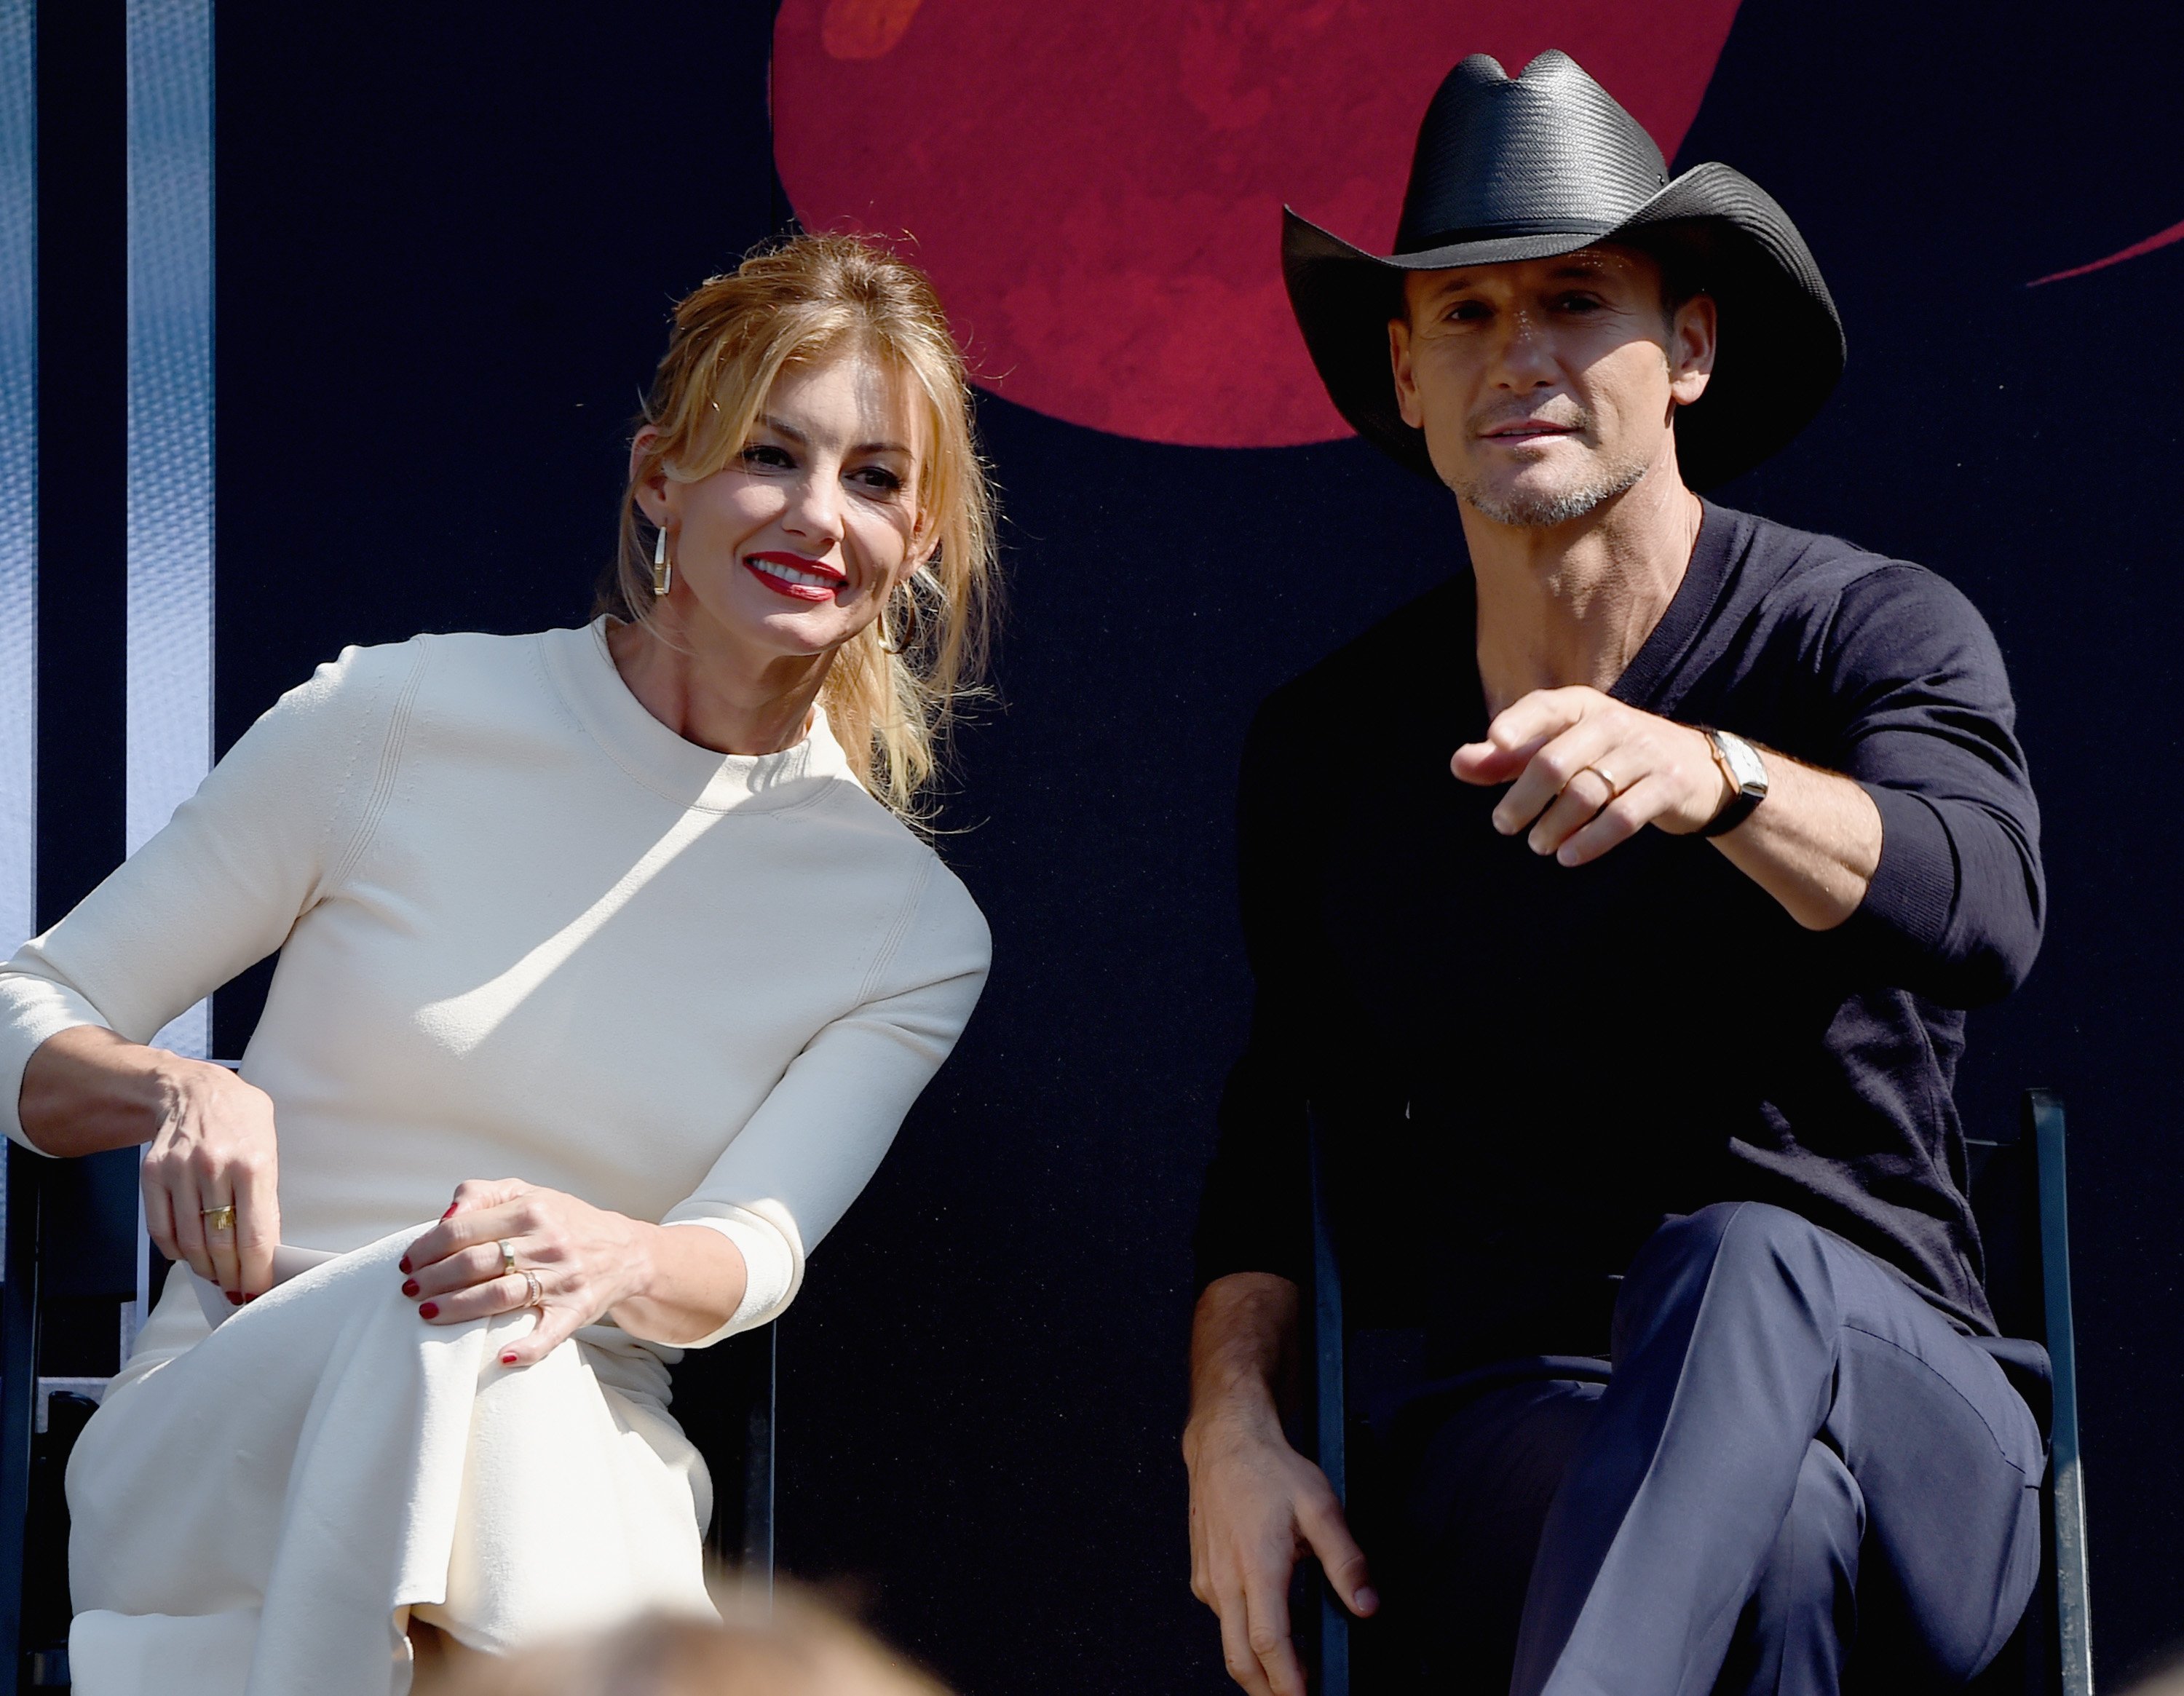 Faith Hill And Tim McGraw during the Nashville Music City Walk Of Fame Induction Ceremony at Nashville Music City Walk of Fame on October 5, 2016, in Nashville, Tennessee. | Source: Getty Images